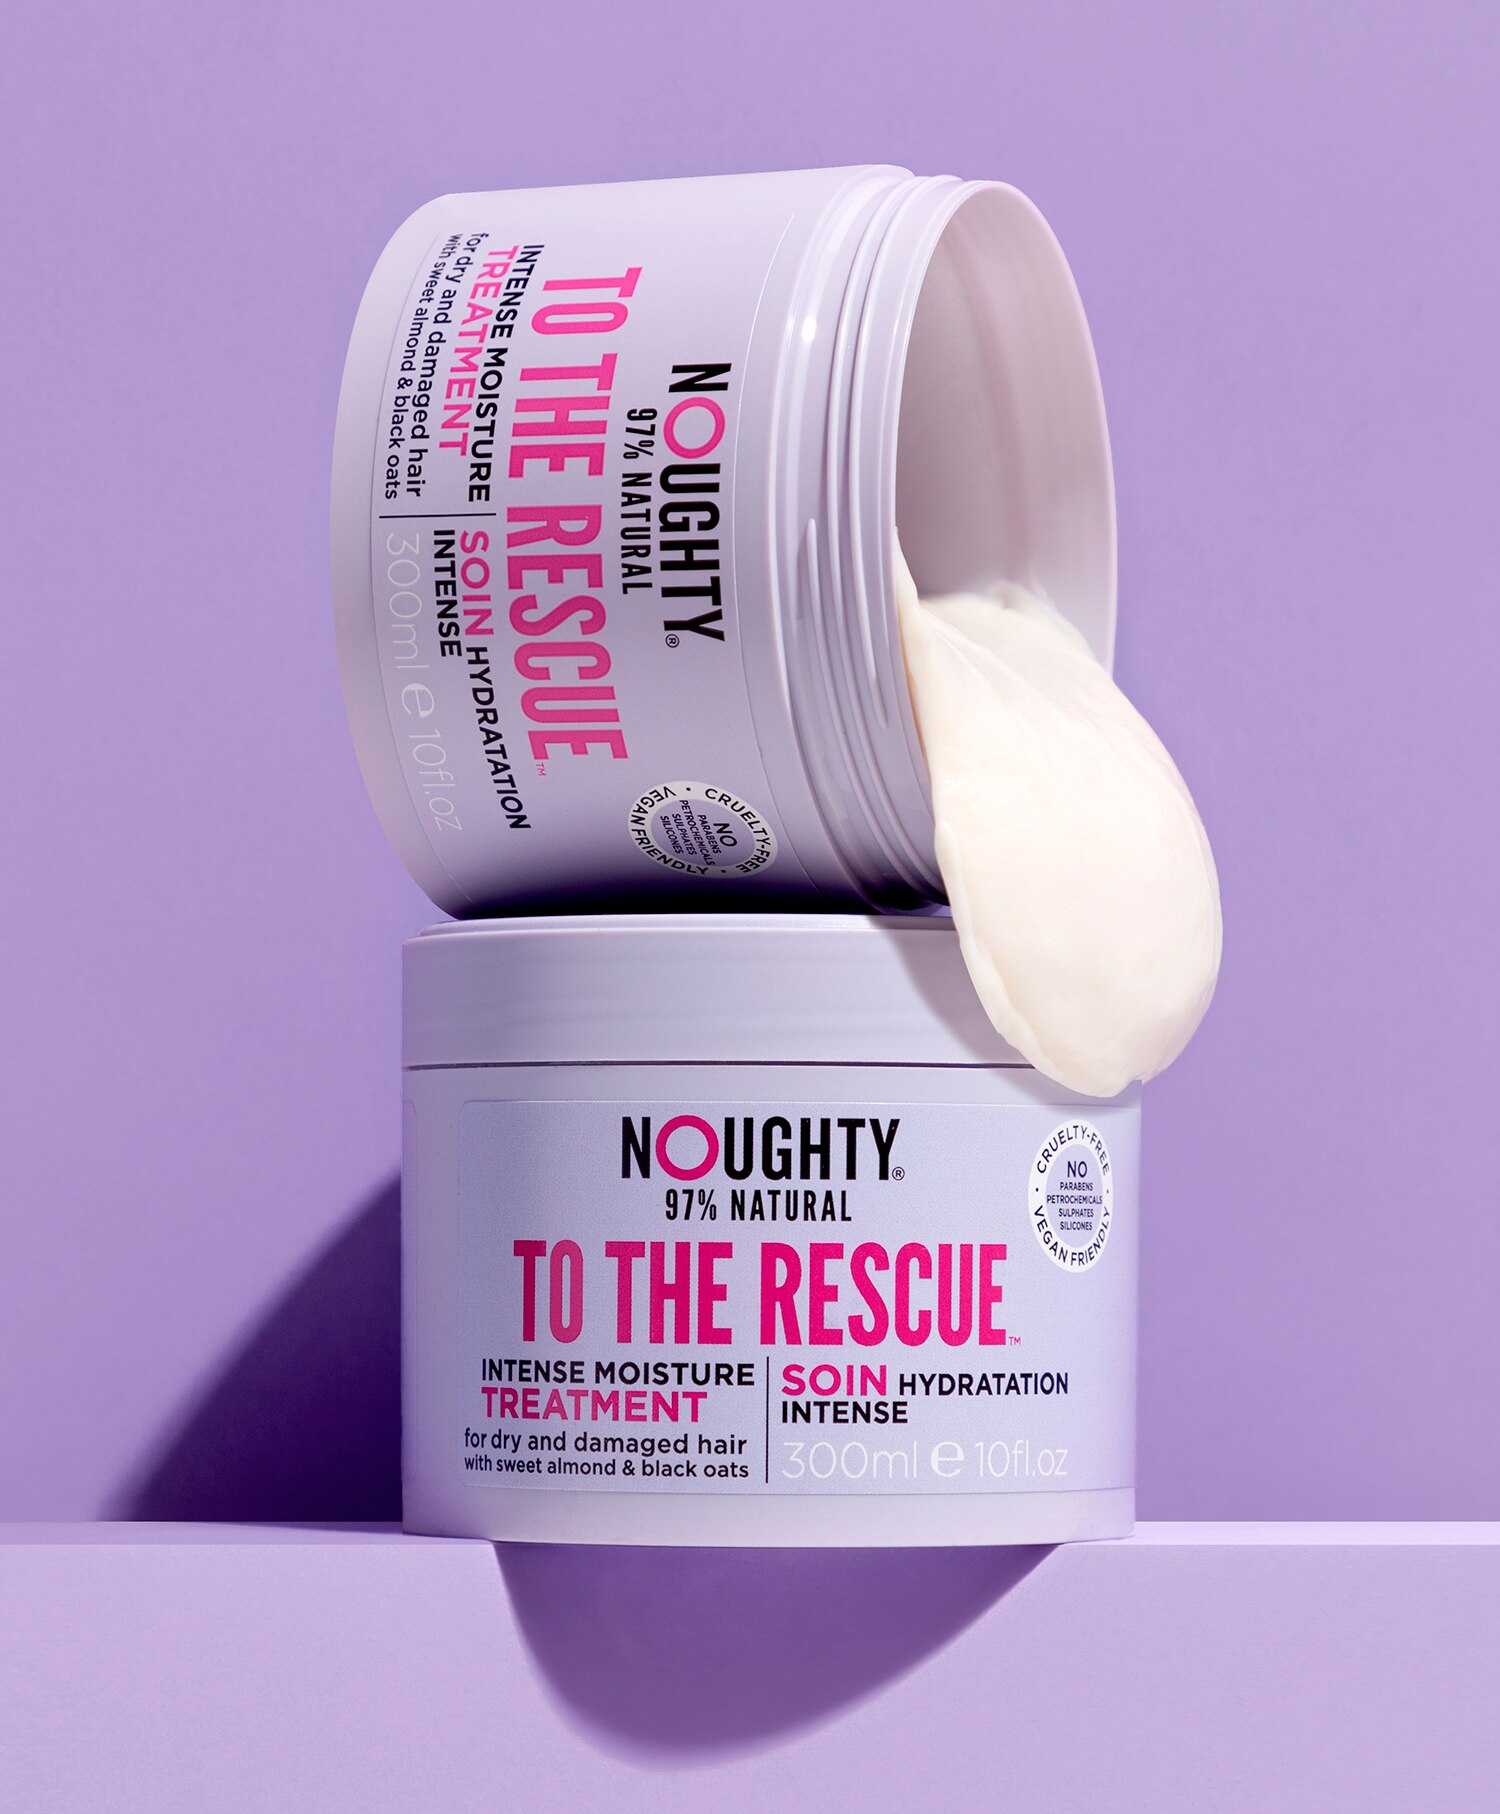 Noughty To The Rescue Intens Moisture Treatment